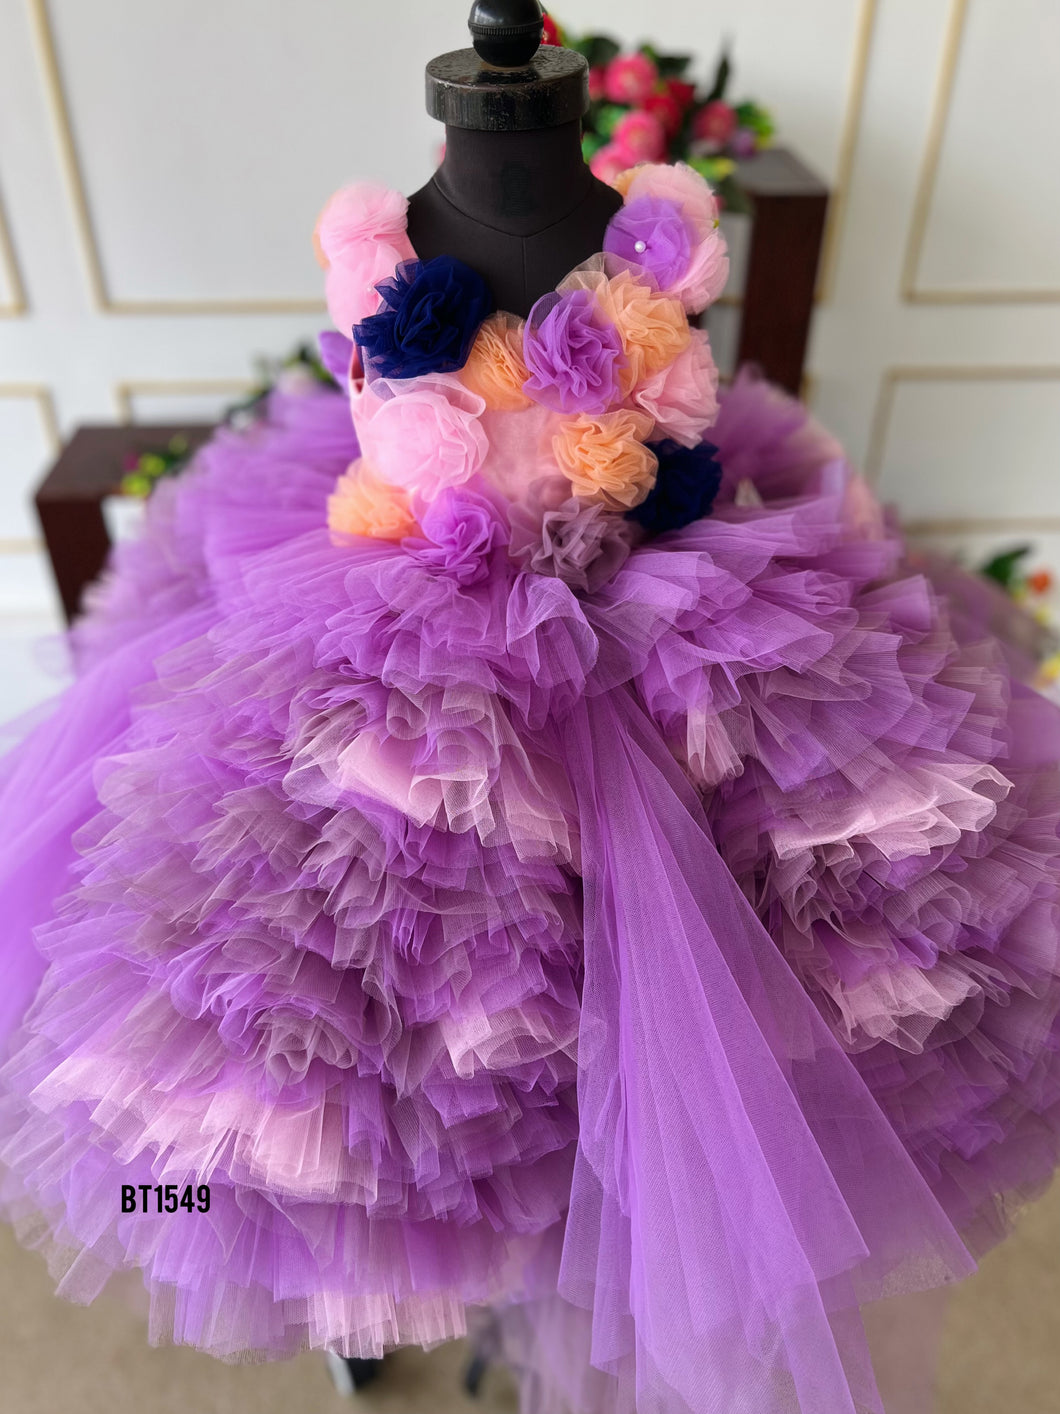 BT1549 Luxury Birthday Party Wear With Flowers